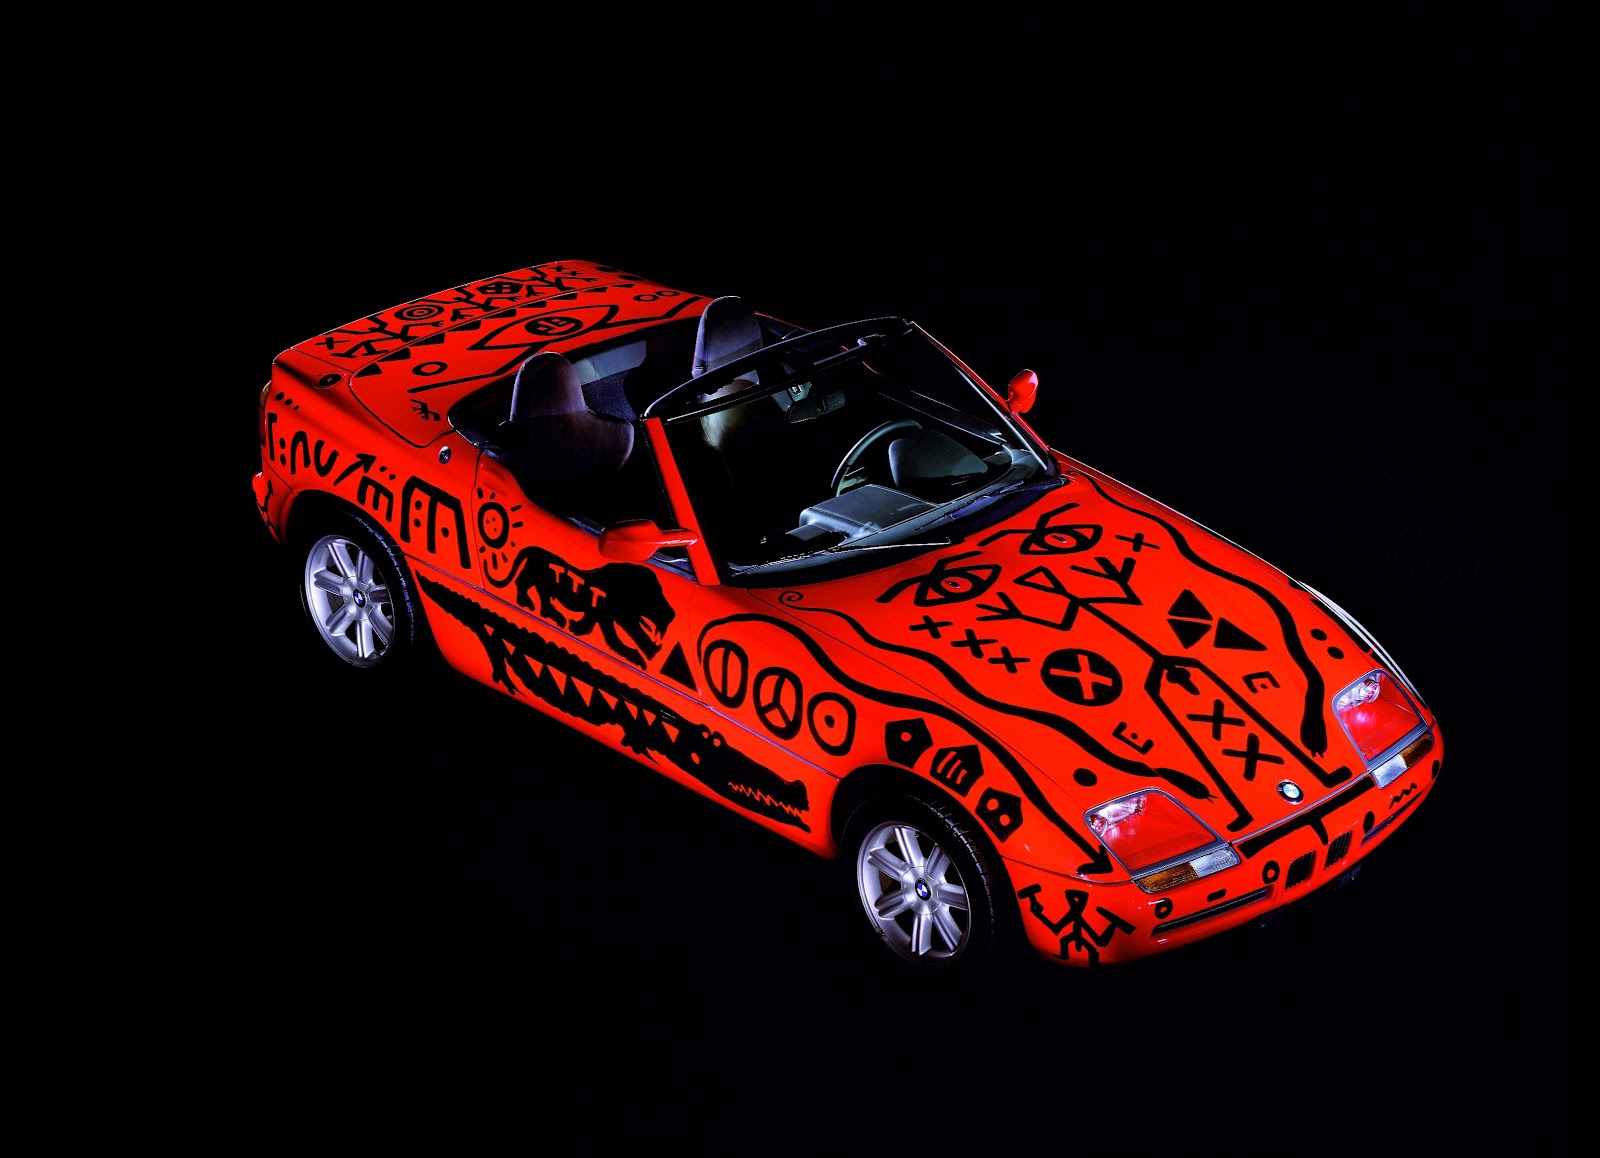 Inspired Ambitions: Airbrush Art on Cars